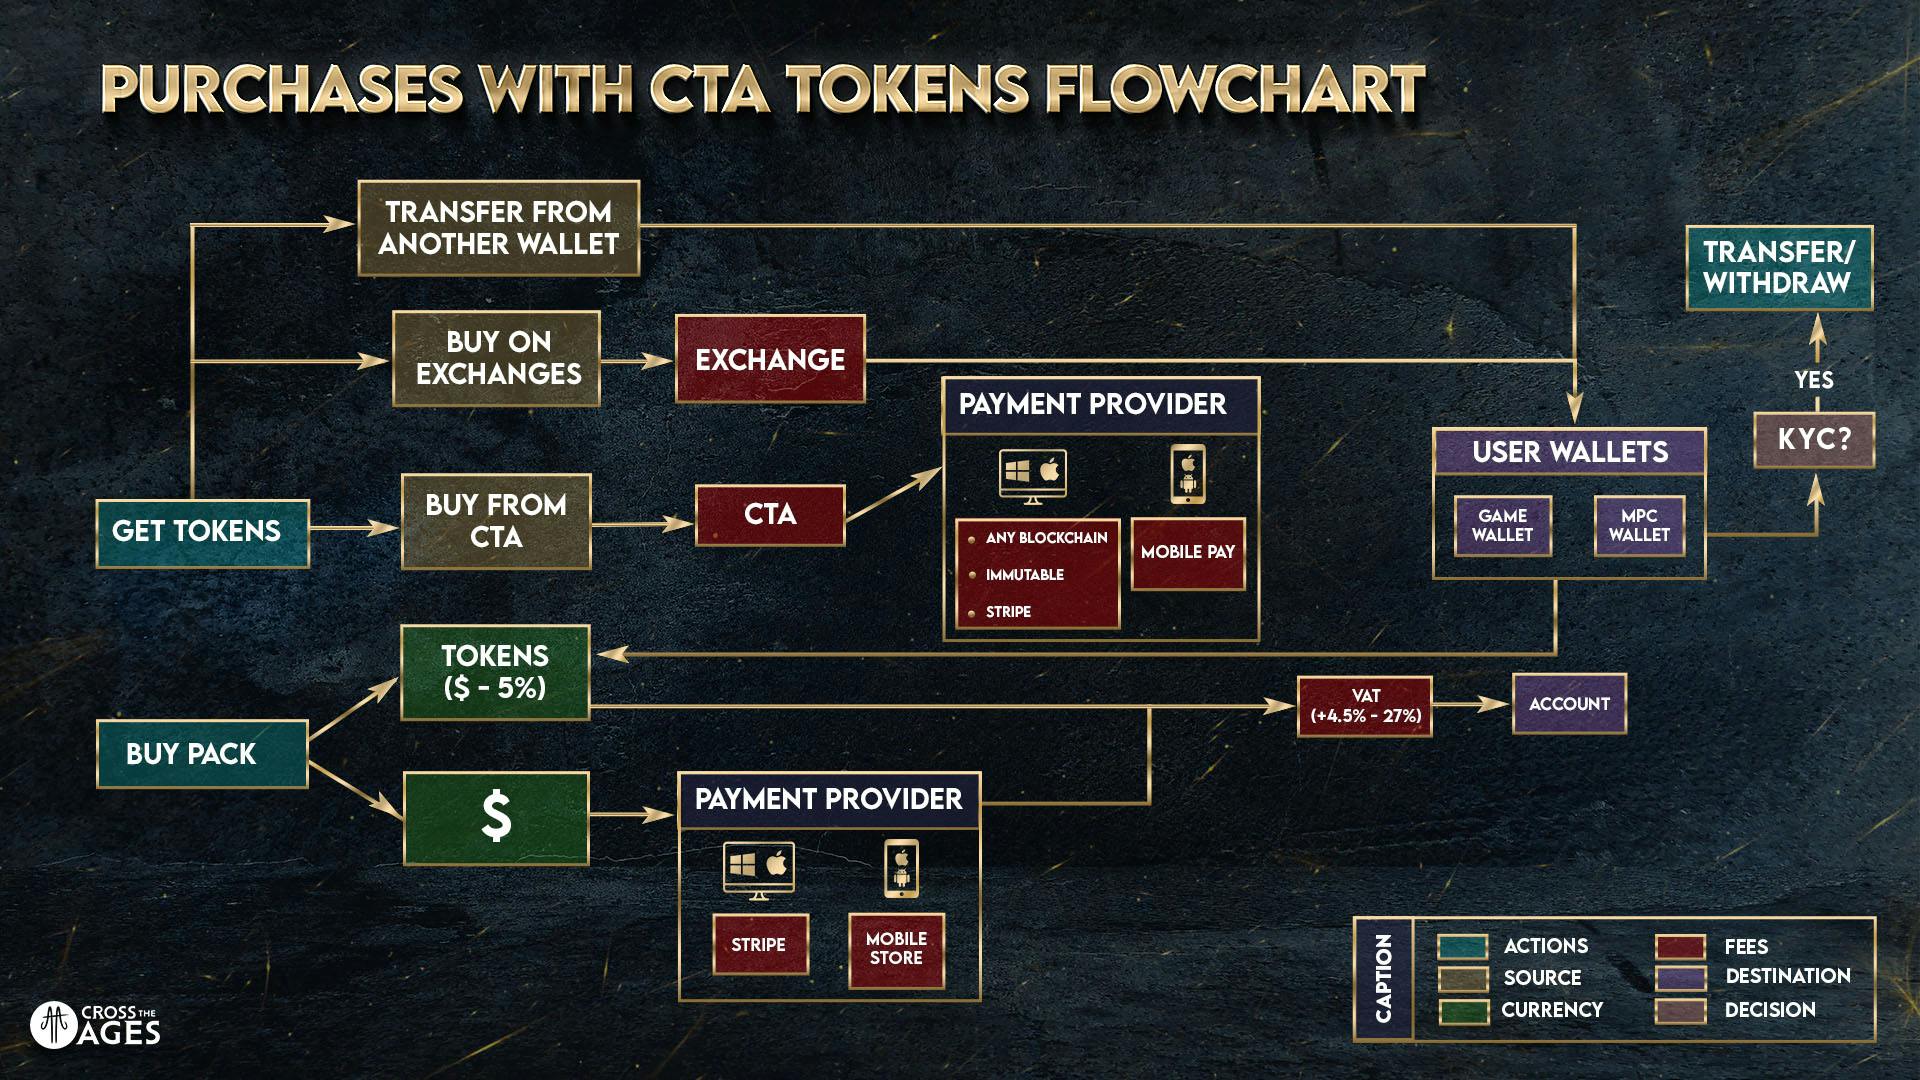 Purchases with CTA tokens flowchart